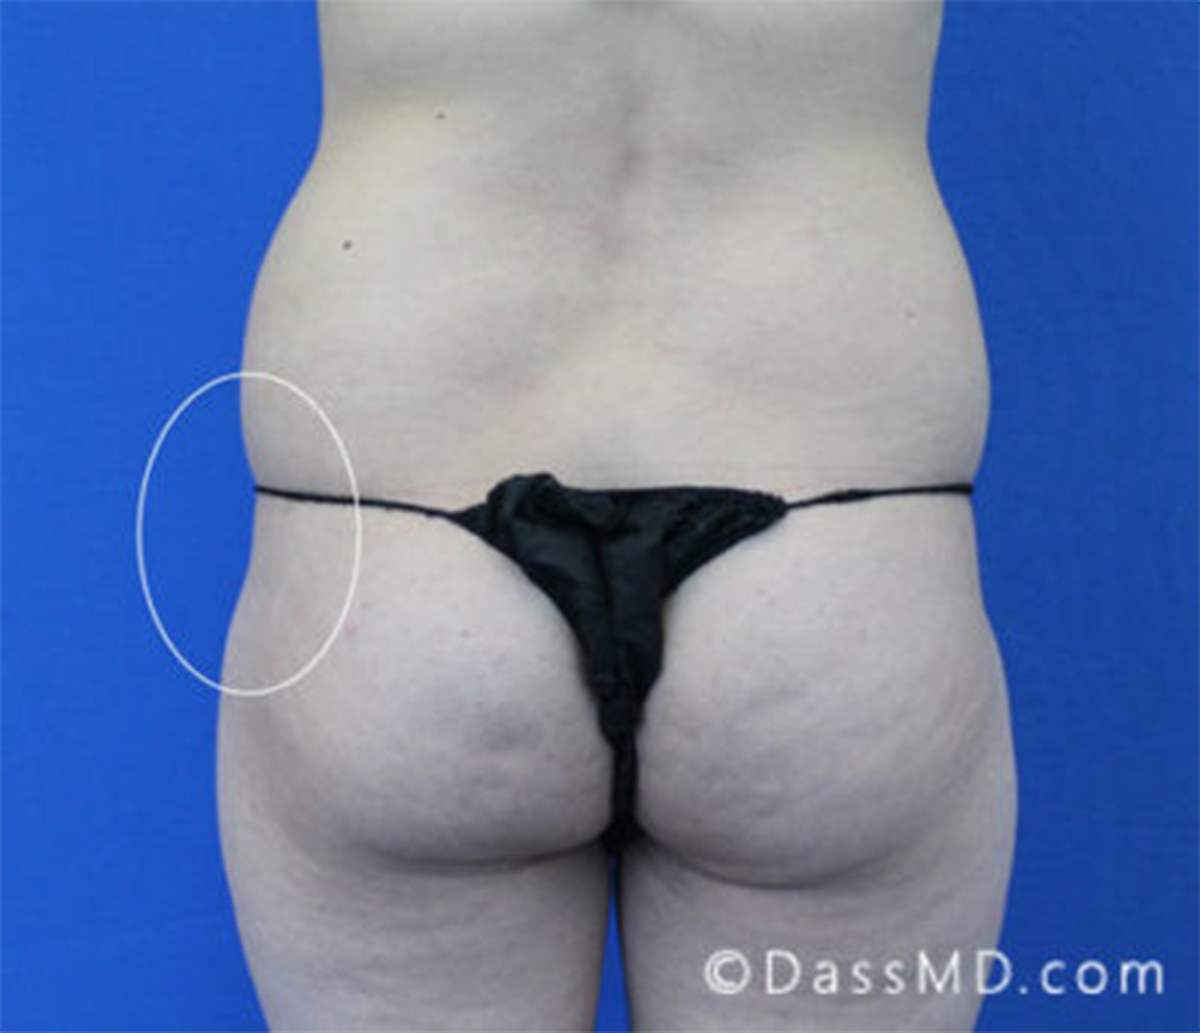 https://www.dassmd.com/wp-content/uploads/2019/05/treatment-of-hip-dips.png